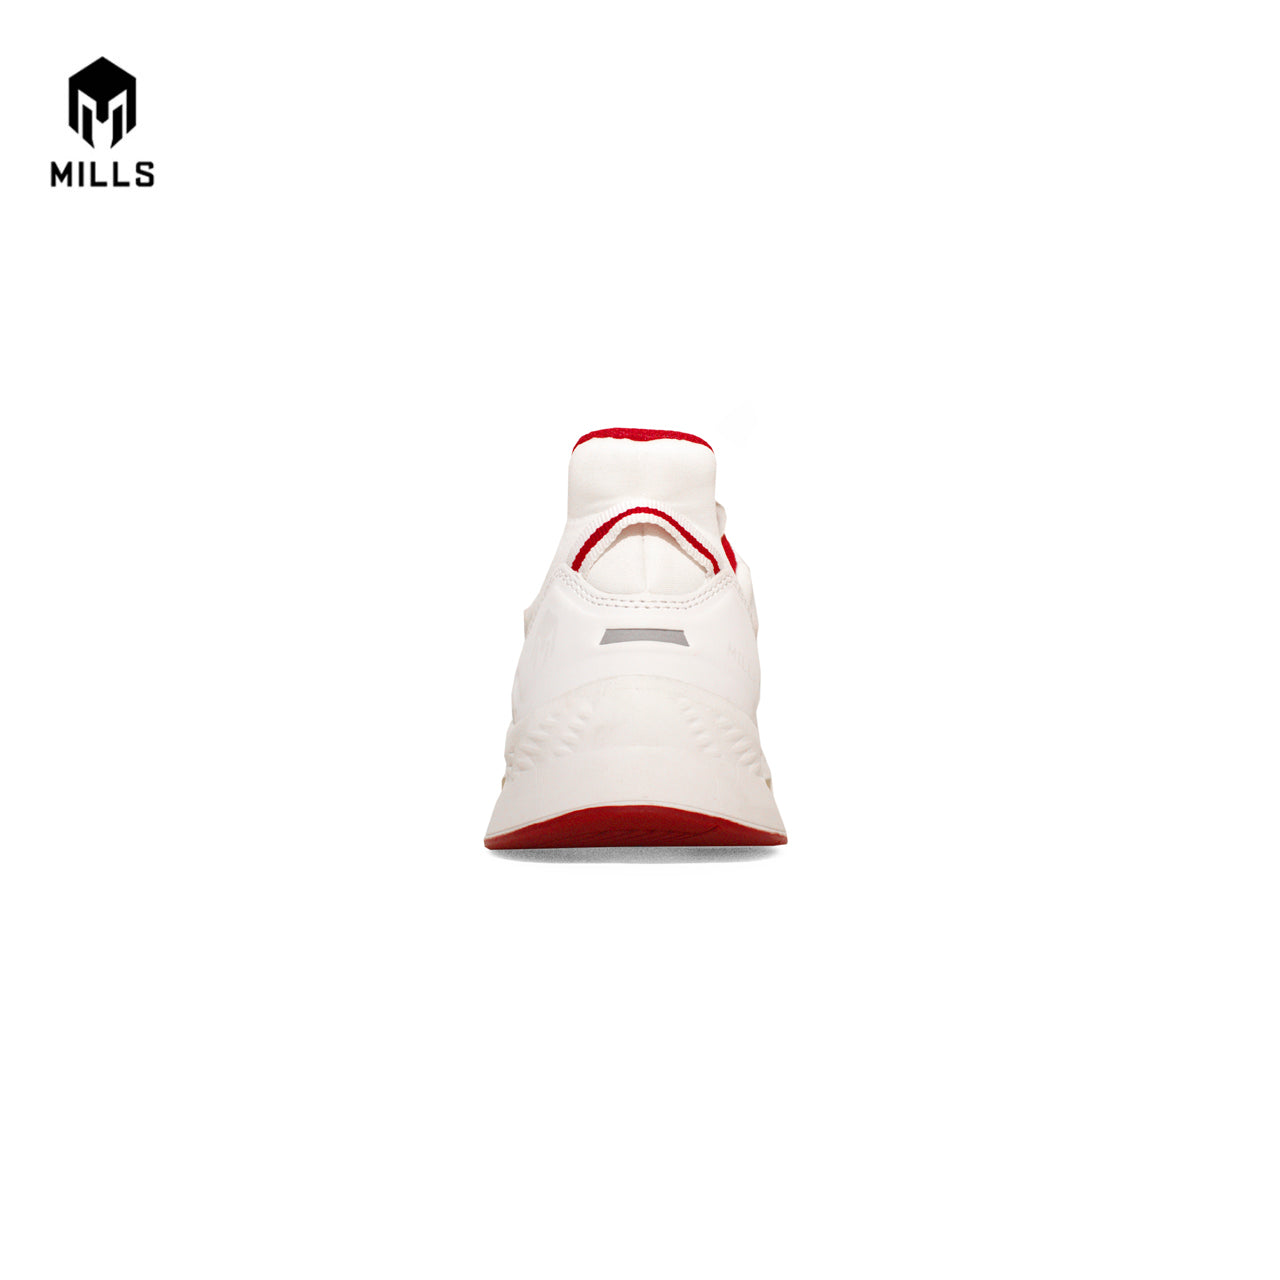 MILLS TREXIMO HYDRA WHITE/RED/GOLD 9100205